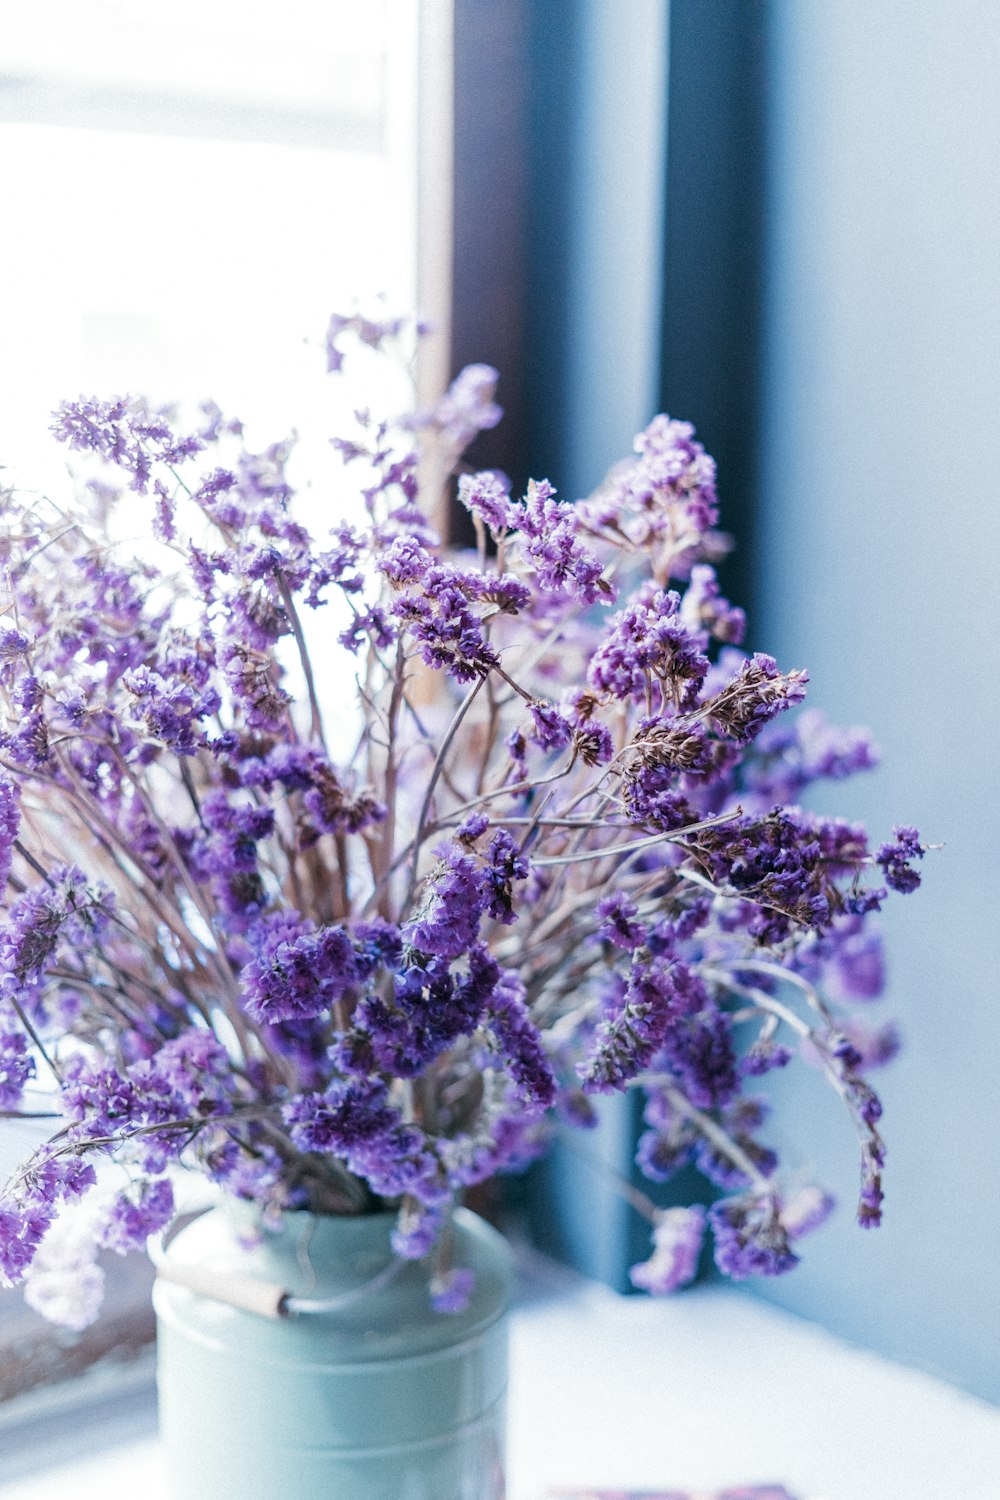 Adding natural elements to your luxury home gives off a calm and soothing ambiance | Image from Unsplash